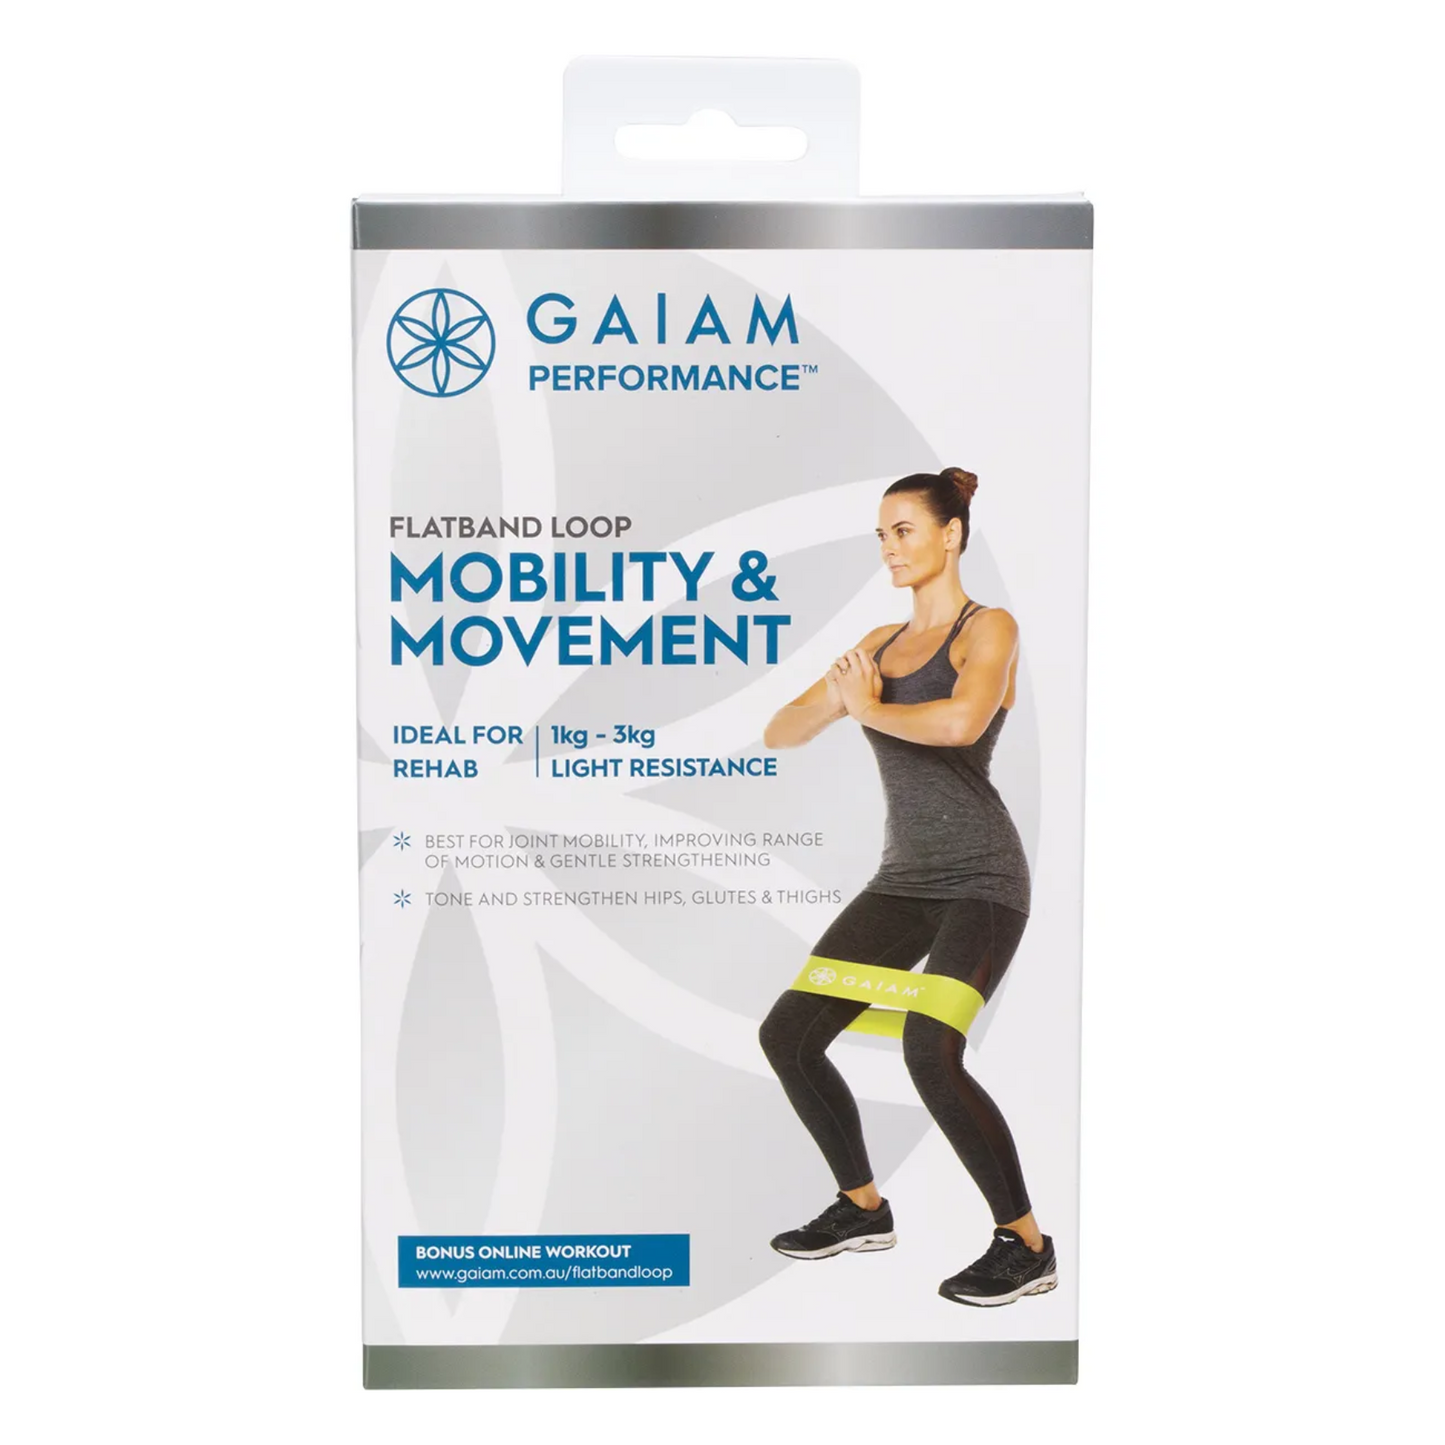 Gaiam Performance Flat Band Loop Mobility & Movement, Light Resistance